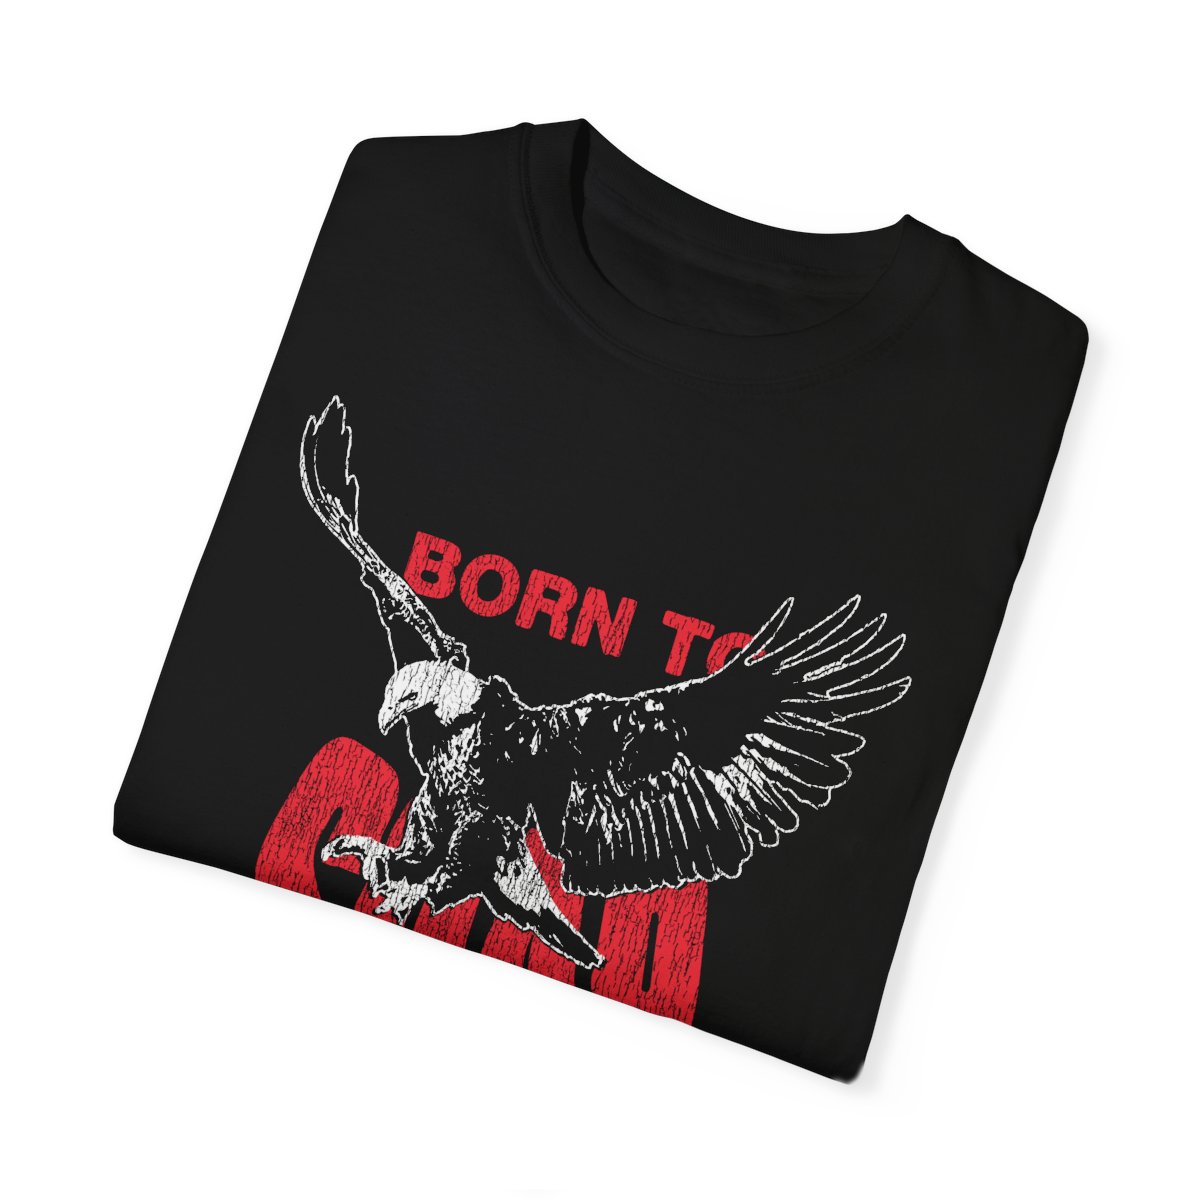 Willow Students - Born To Soar T-Shirt product thumbnail image